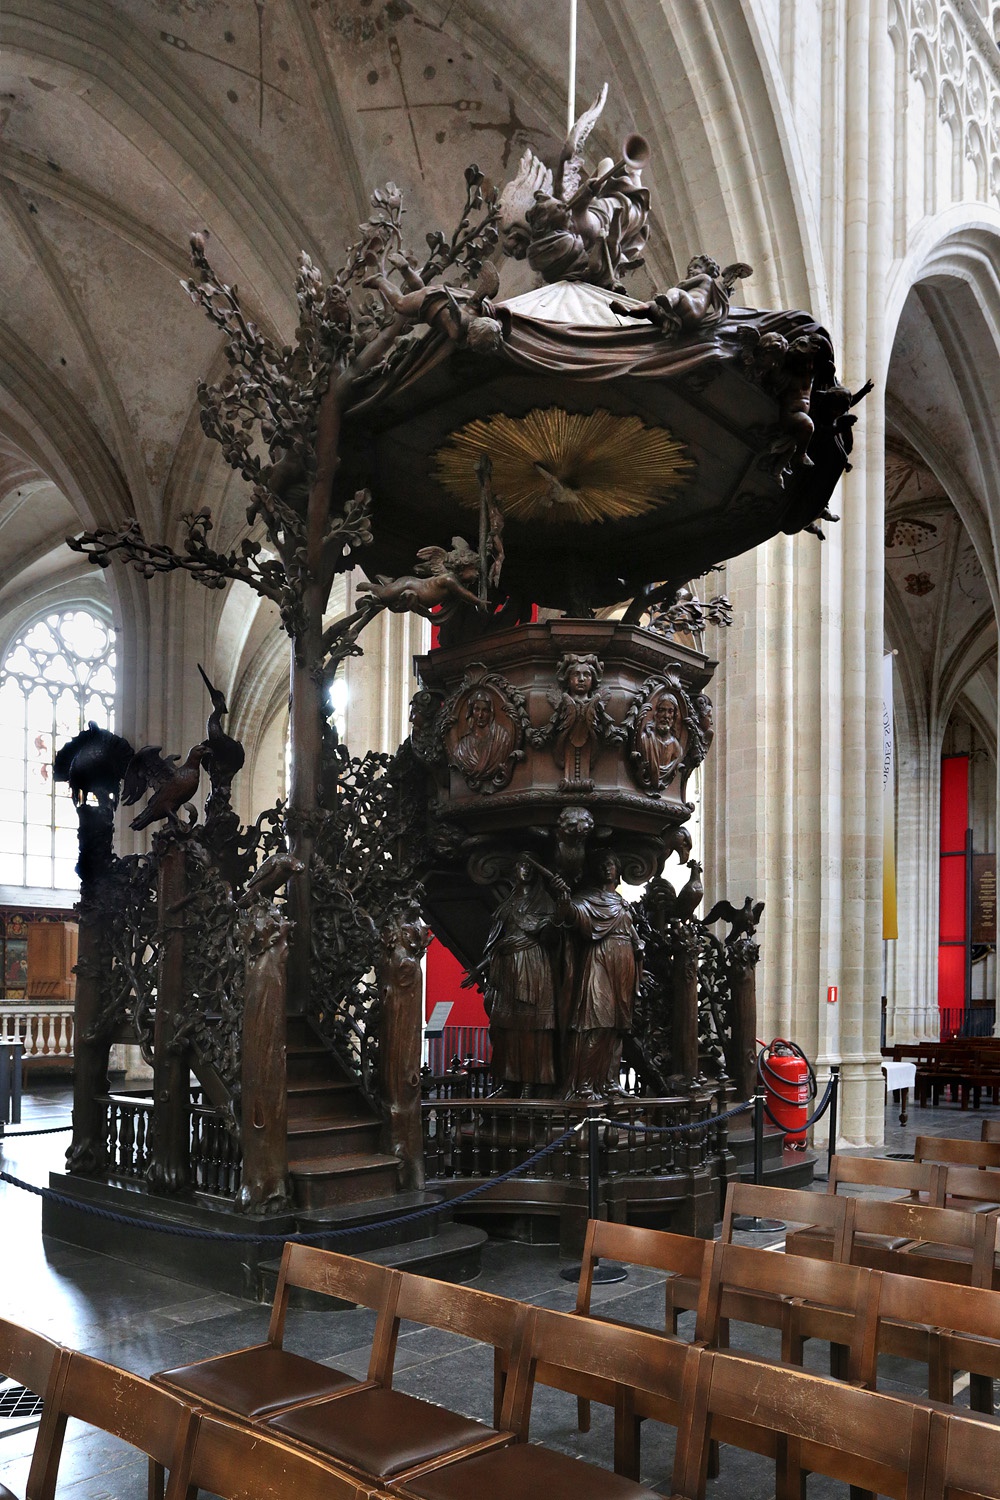 bill-hocker-pulpit-cathedral-of-our-lady-antwerp-belgium-2016